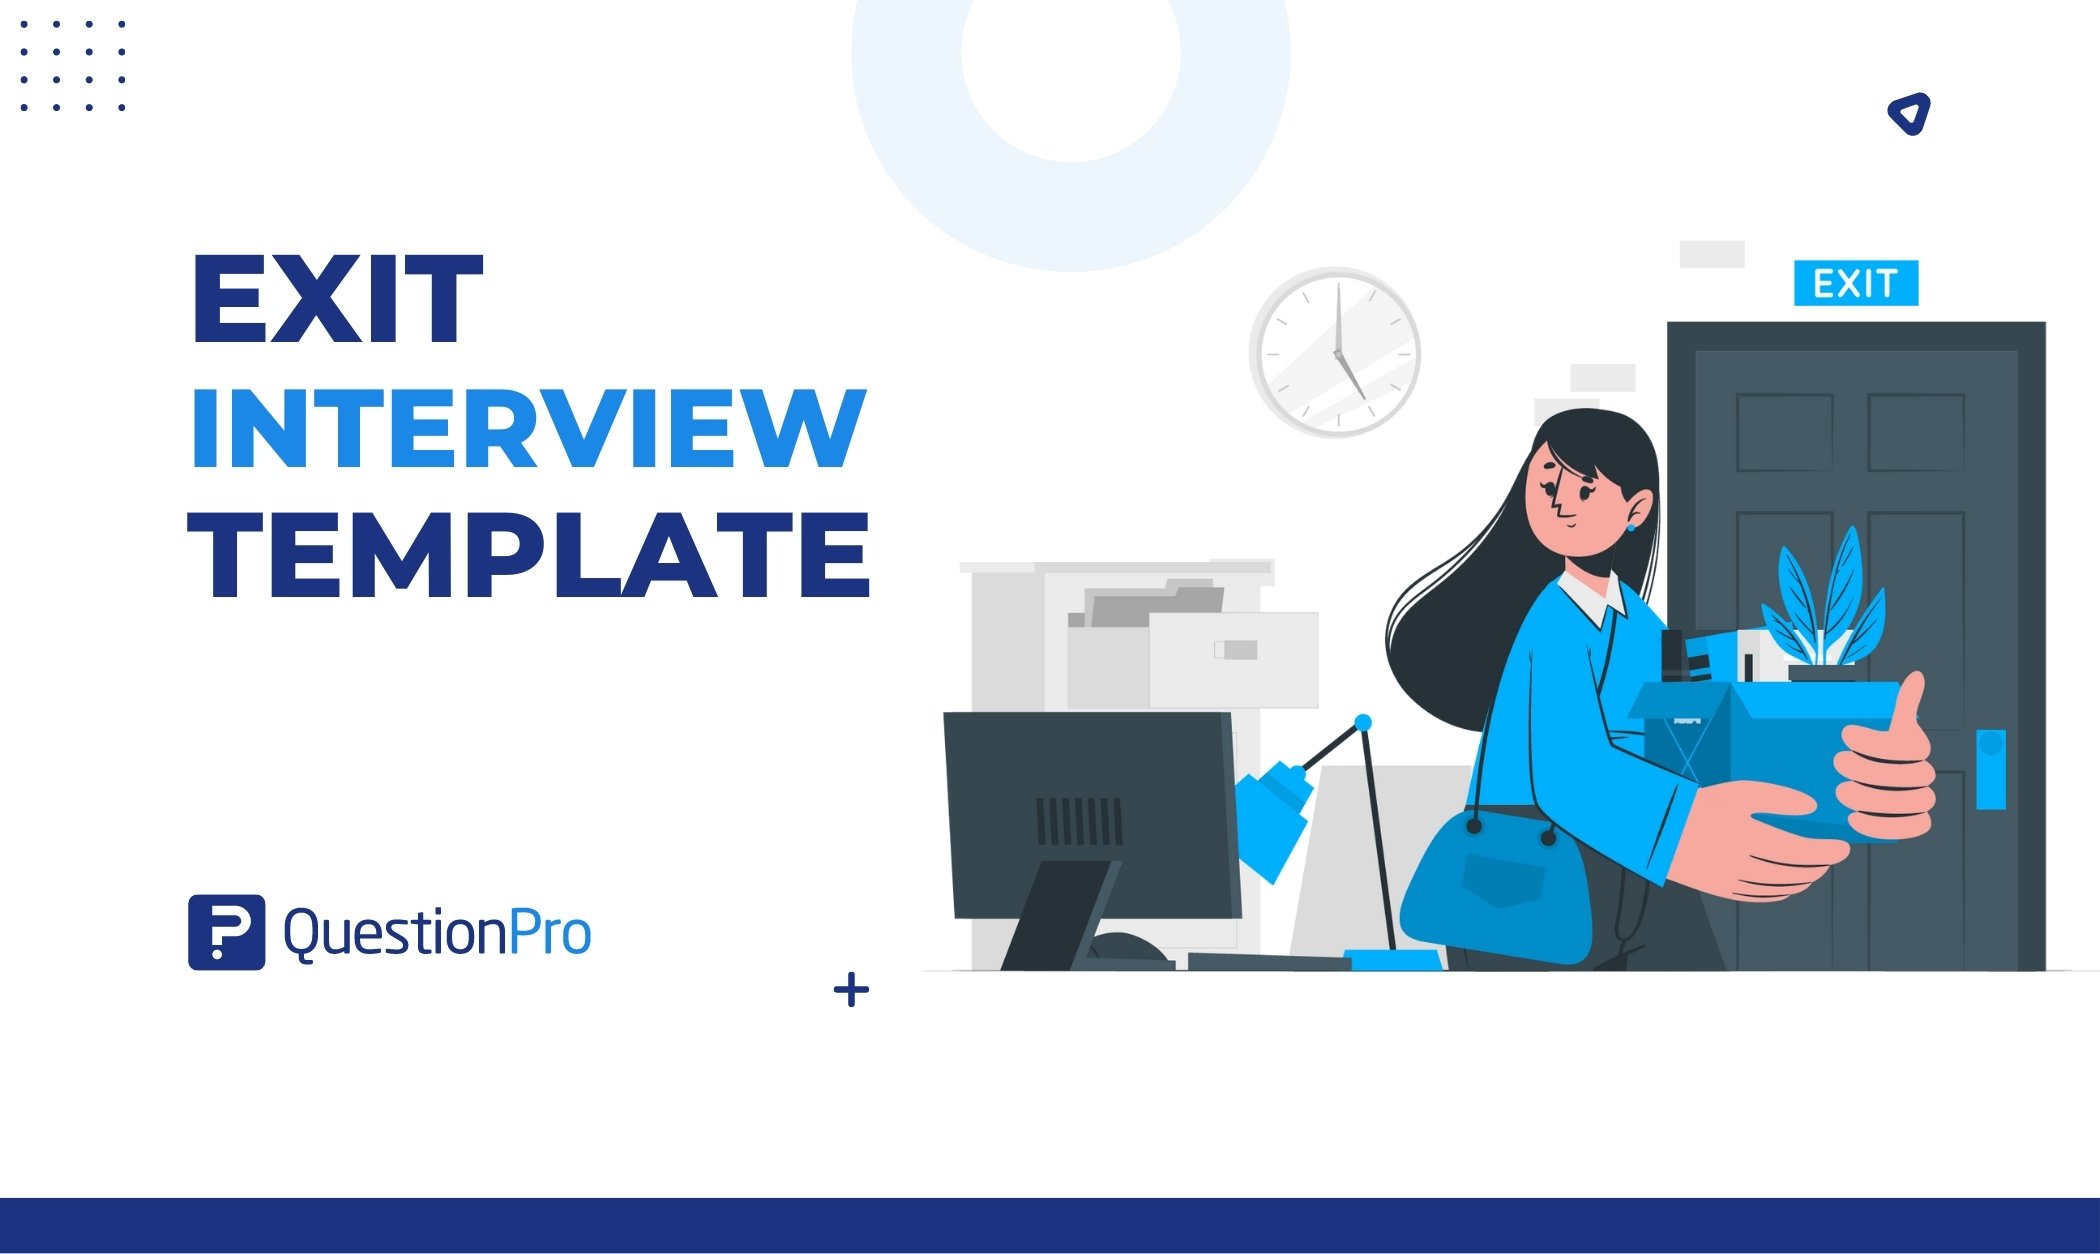 Exit Interview Template: What it is & 9 Templates to Follow